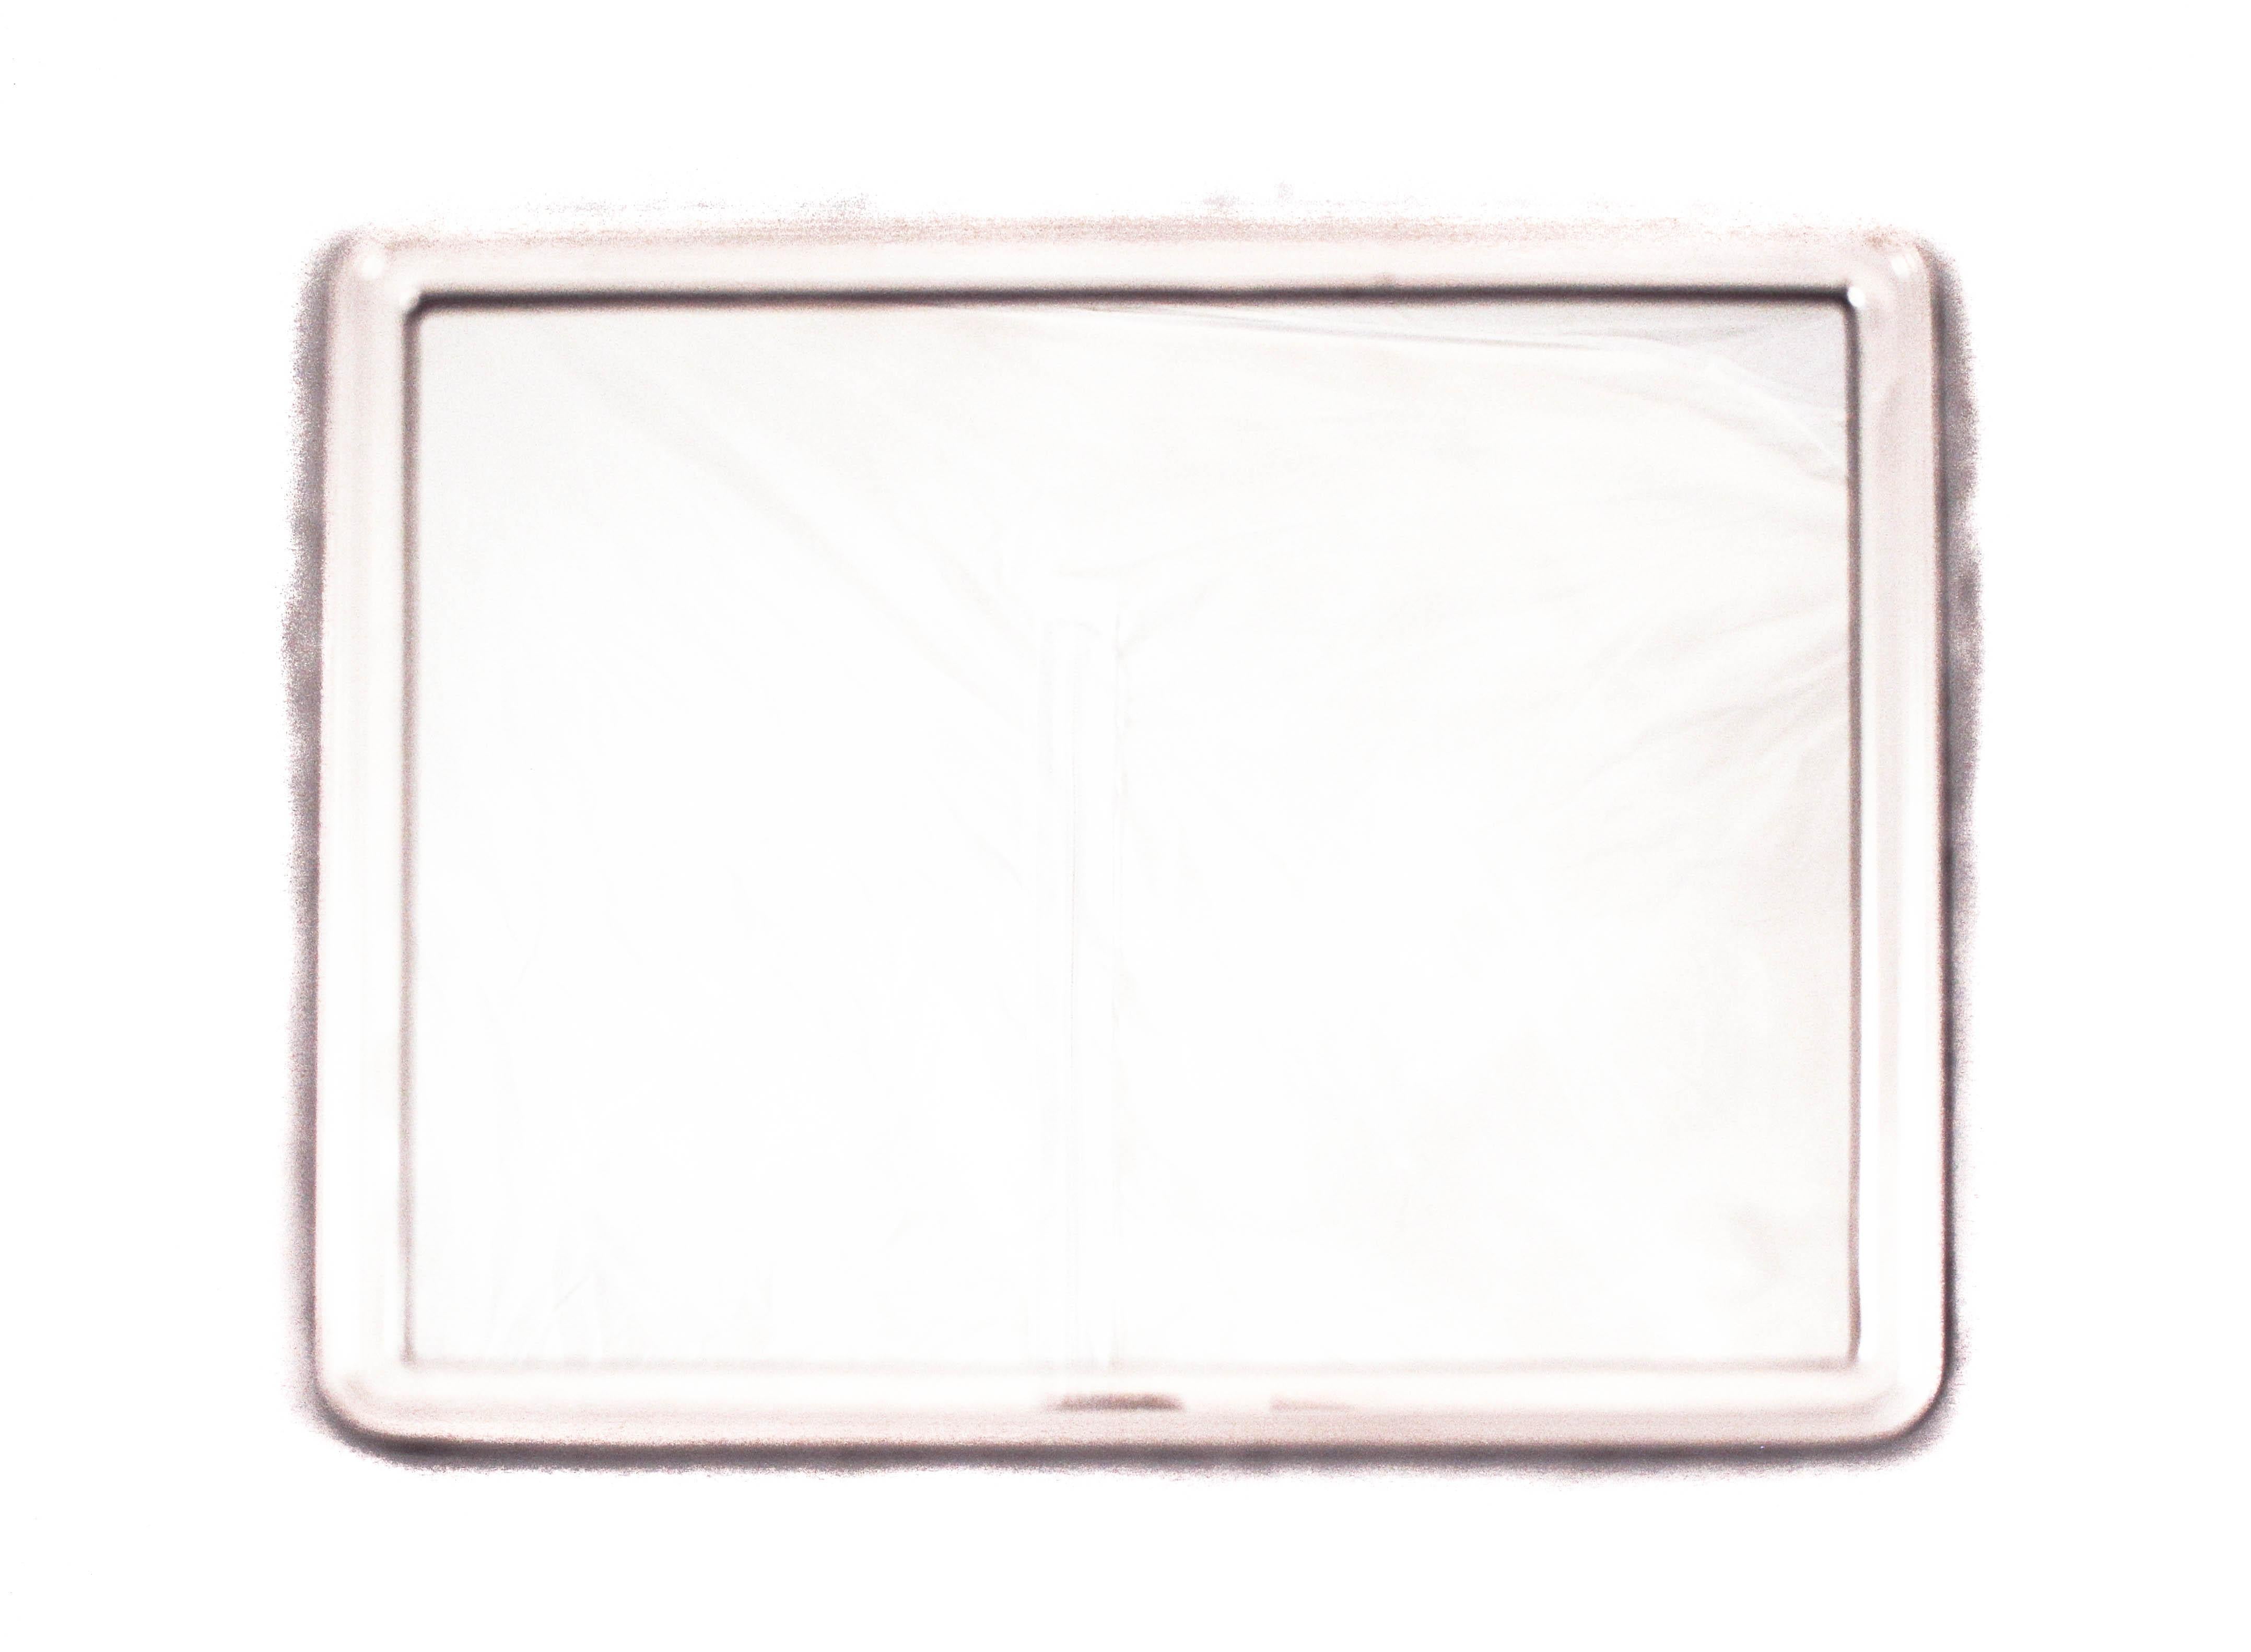 Being offered is a sterling silver men’s vanity tray. Masculine and understated, it has a sterling silver rim with a mirrored center. Ideal for his cologne, watch, cufflinks and keys. A pretty way to keep the vanity neat and orderly. The perfect